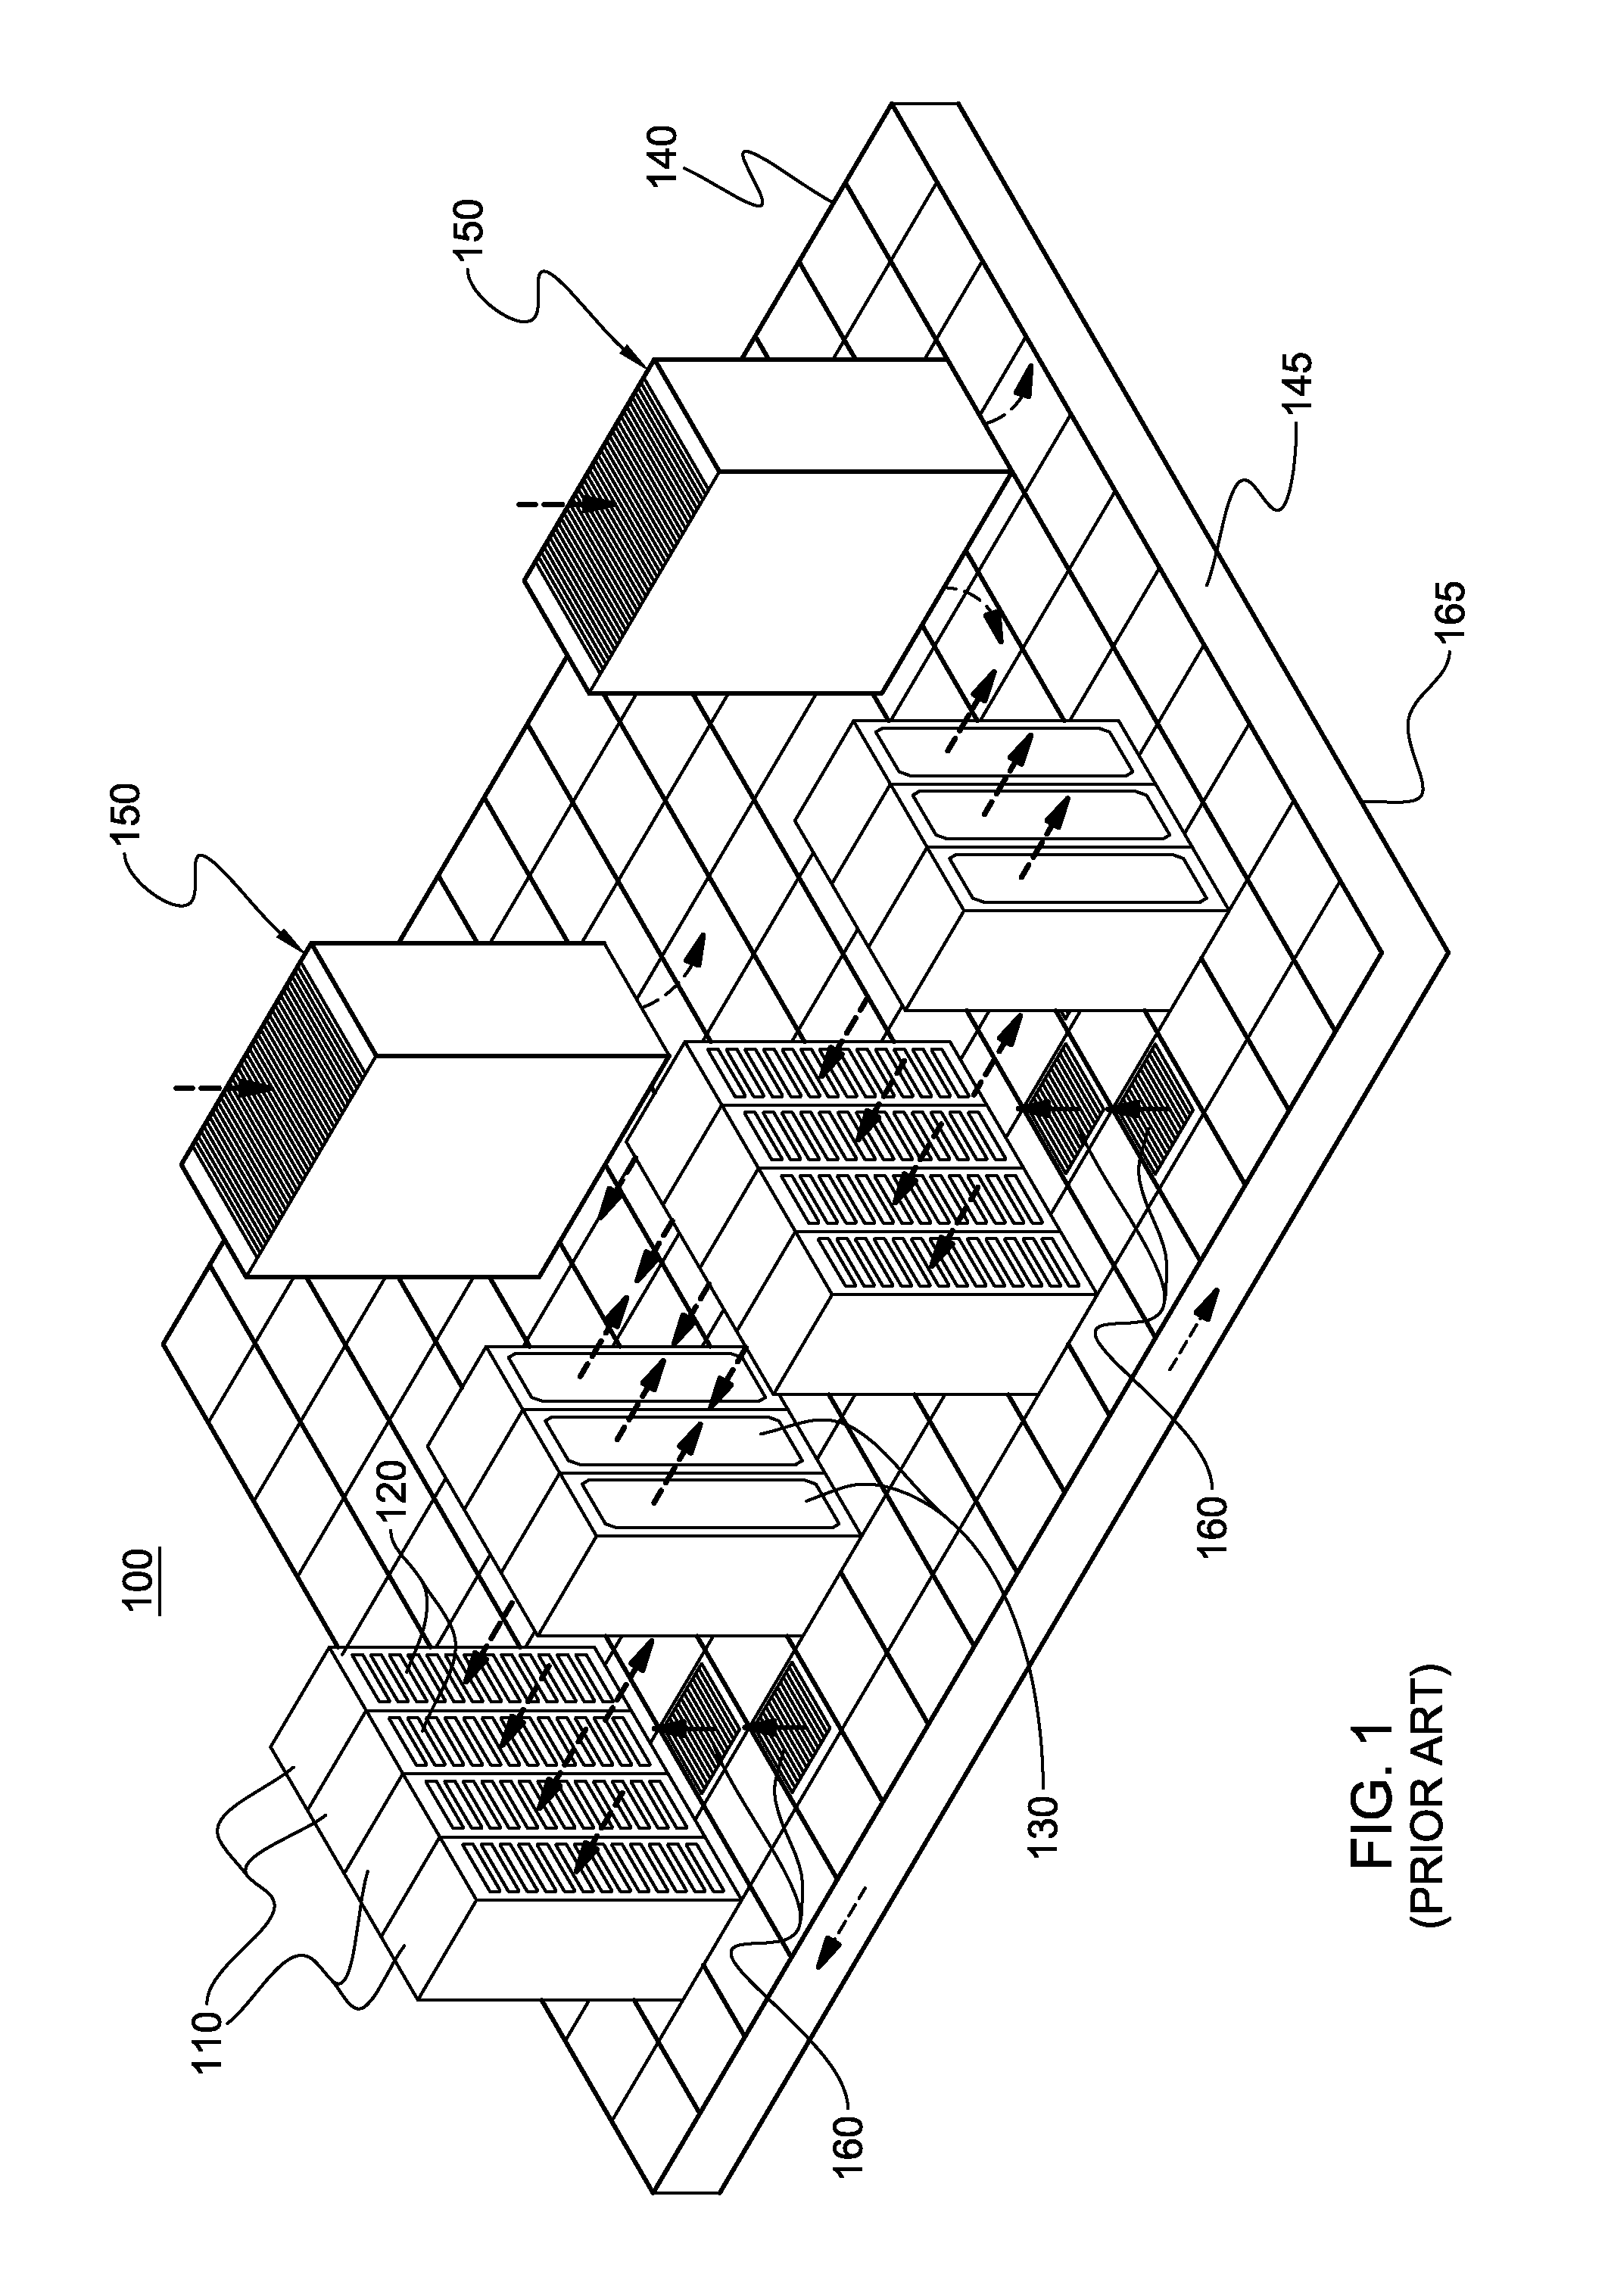 Process for optimizing a heat exchanger configuration